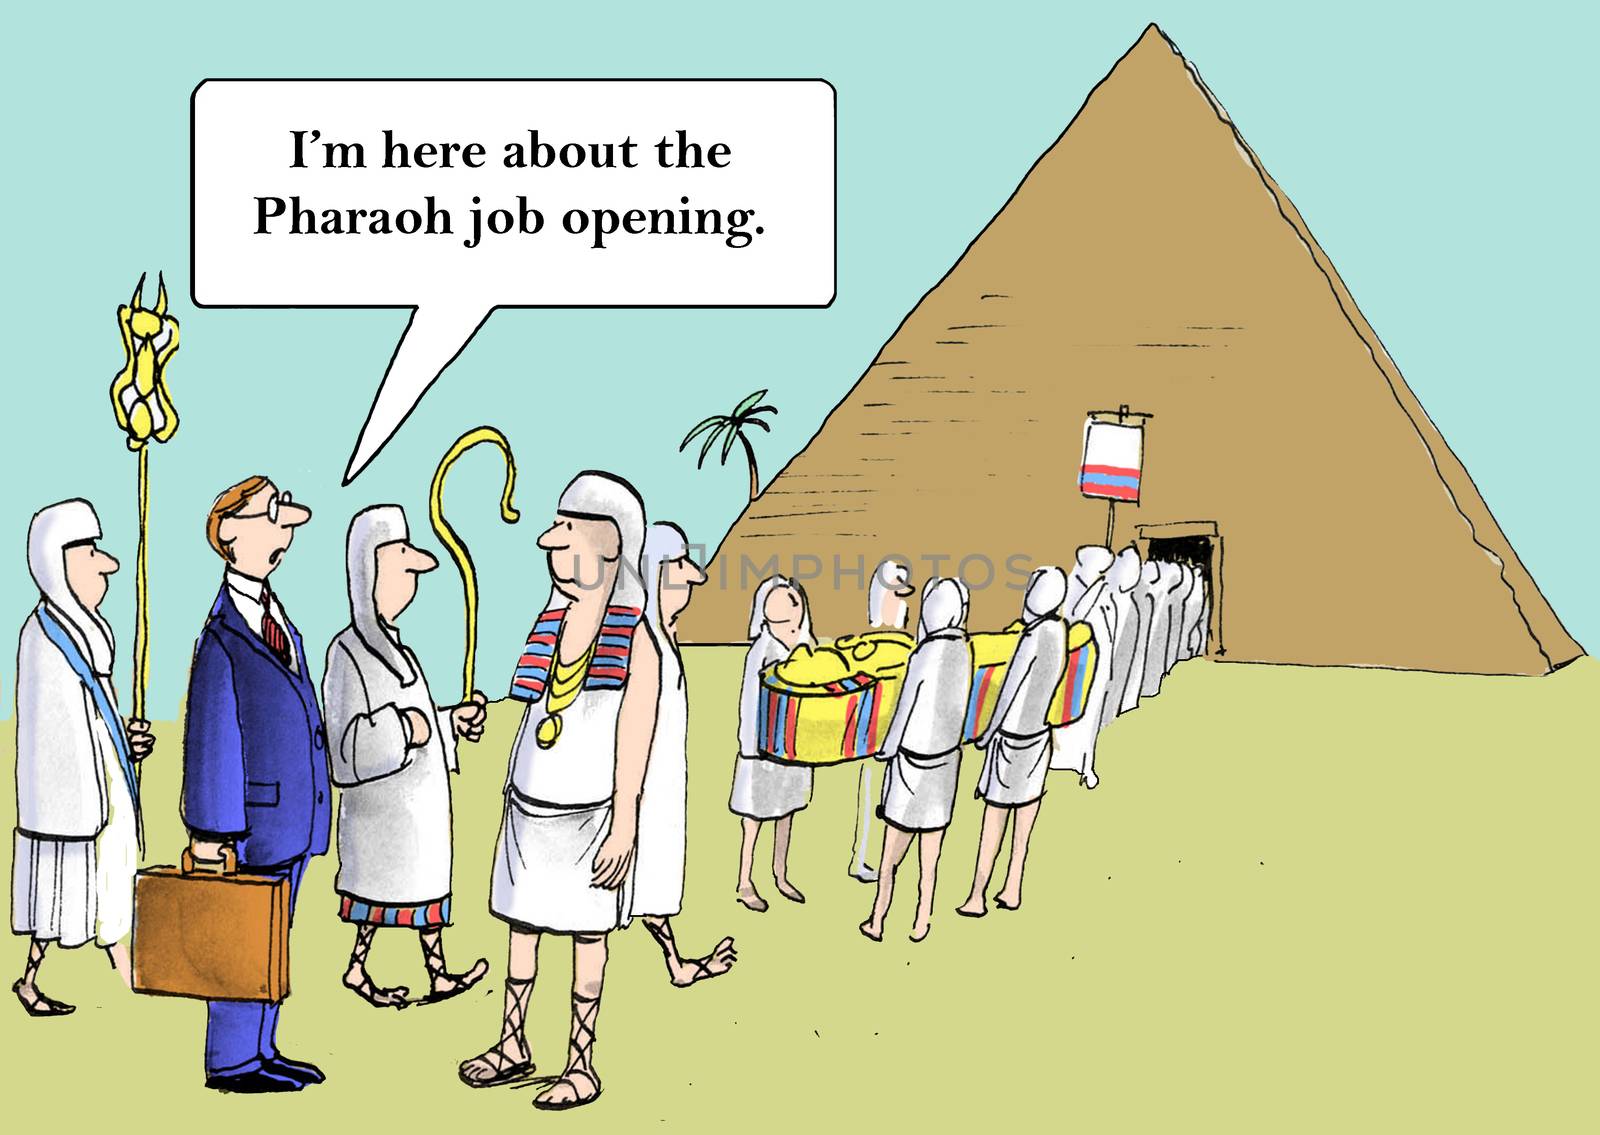 I'm sure the Pharaoh was a great guy by andrewgenn